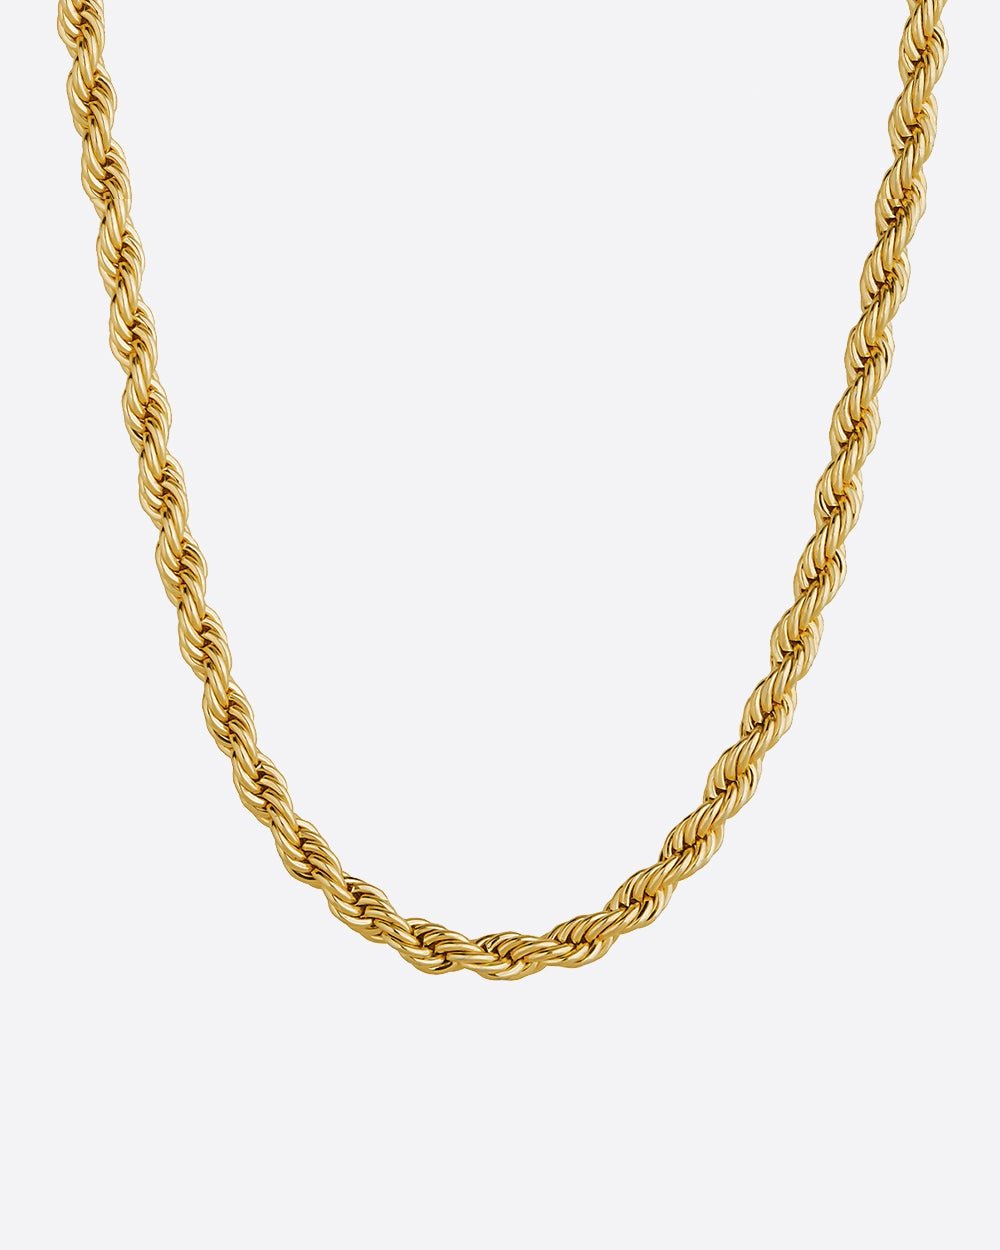 CLEAN ROPE. - 3MM 18K GOLD - Drippy Amsterdam